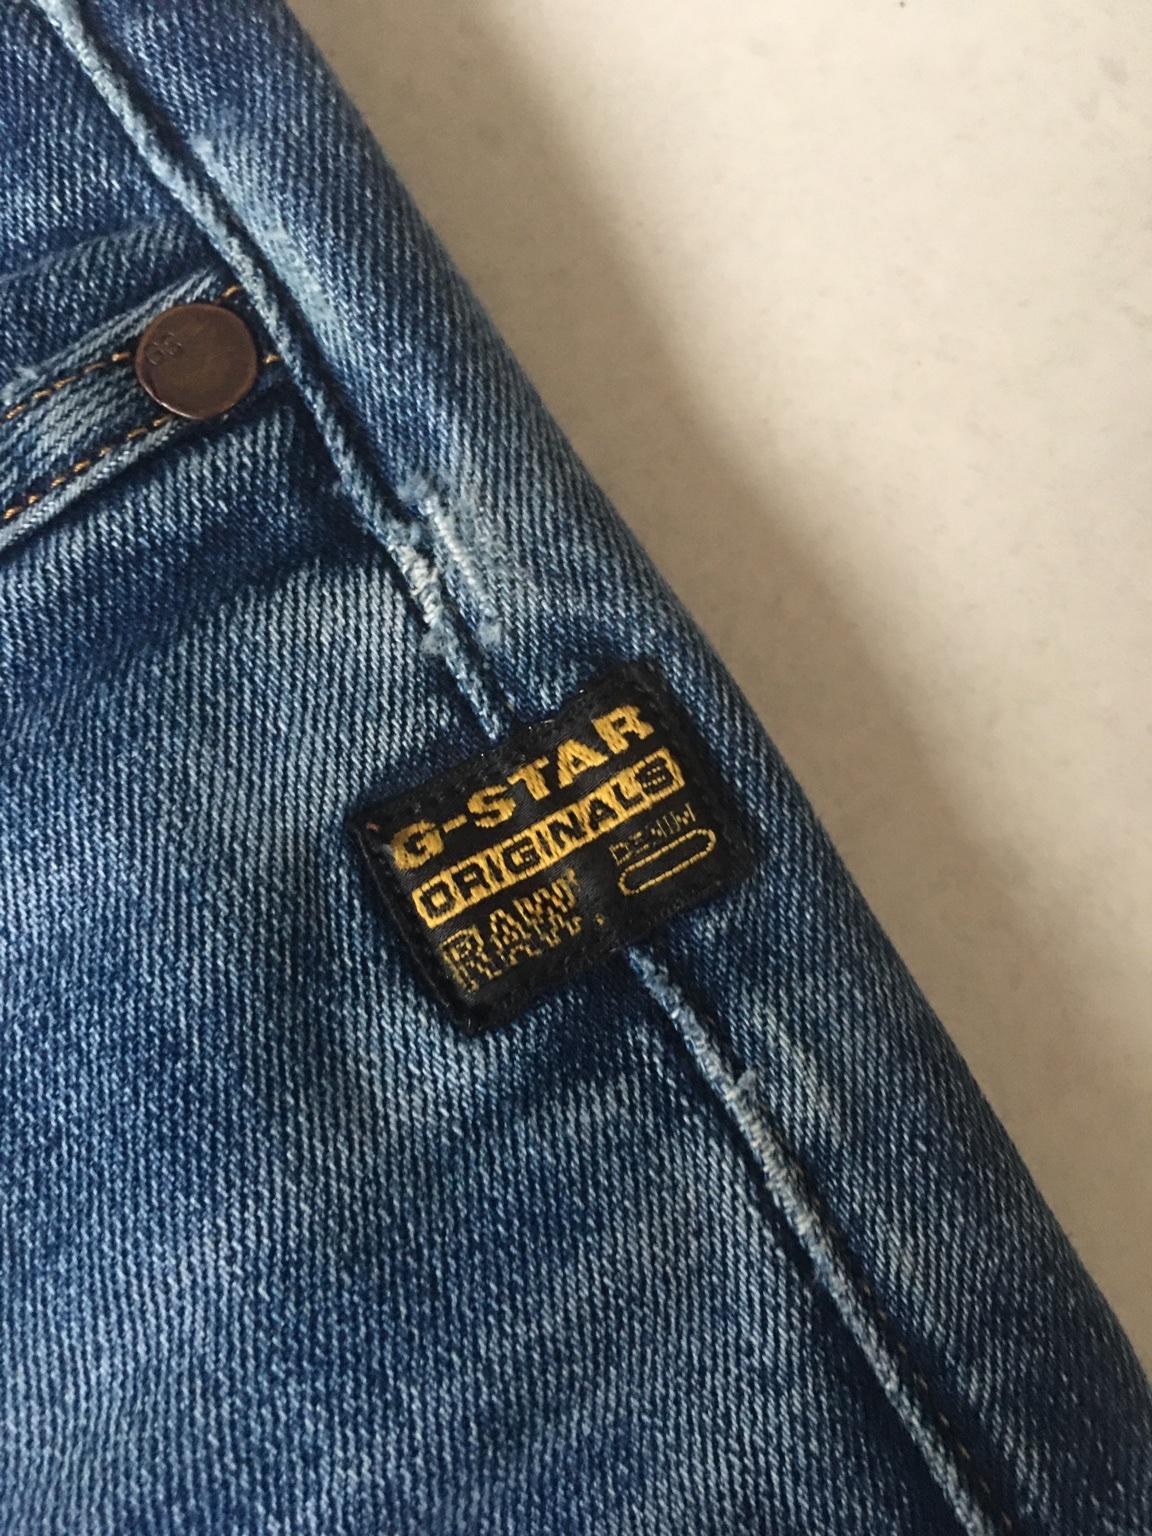 gs raw 5204 jeans